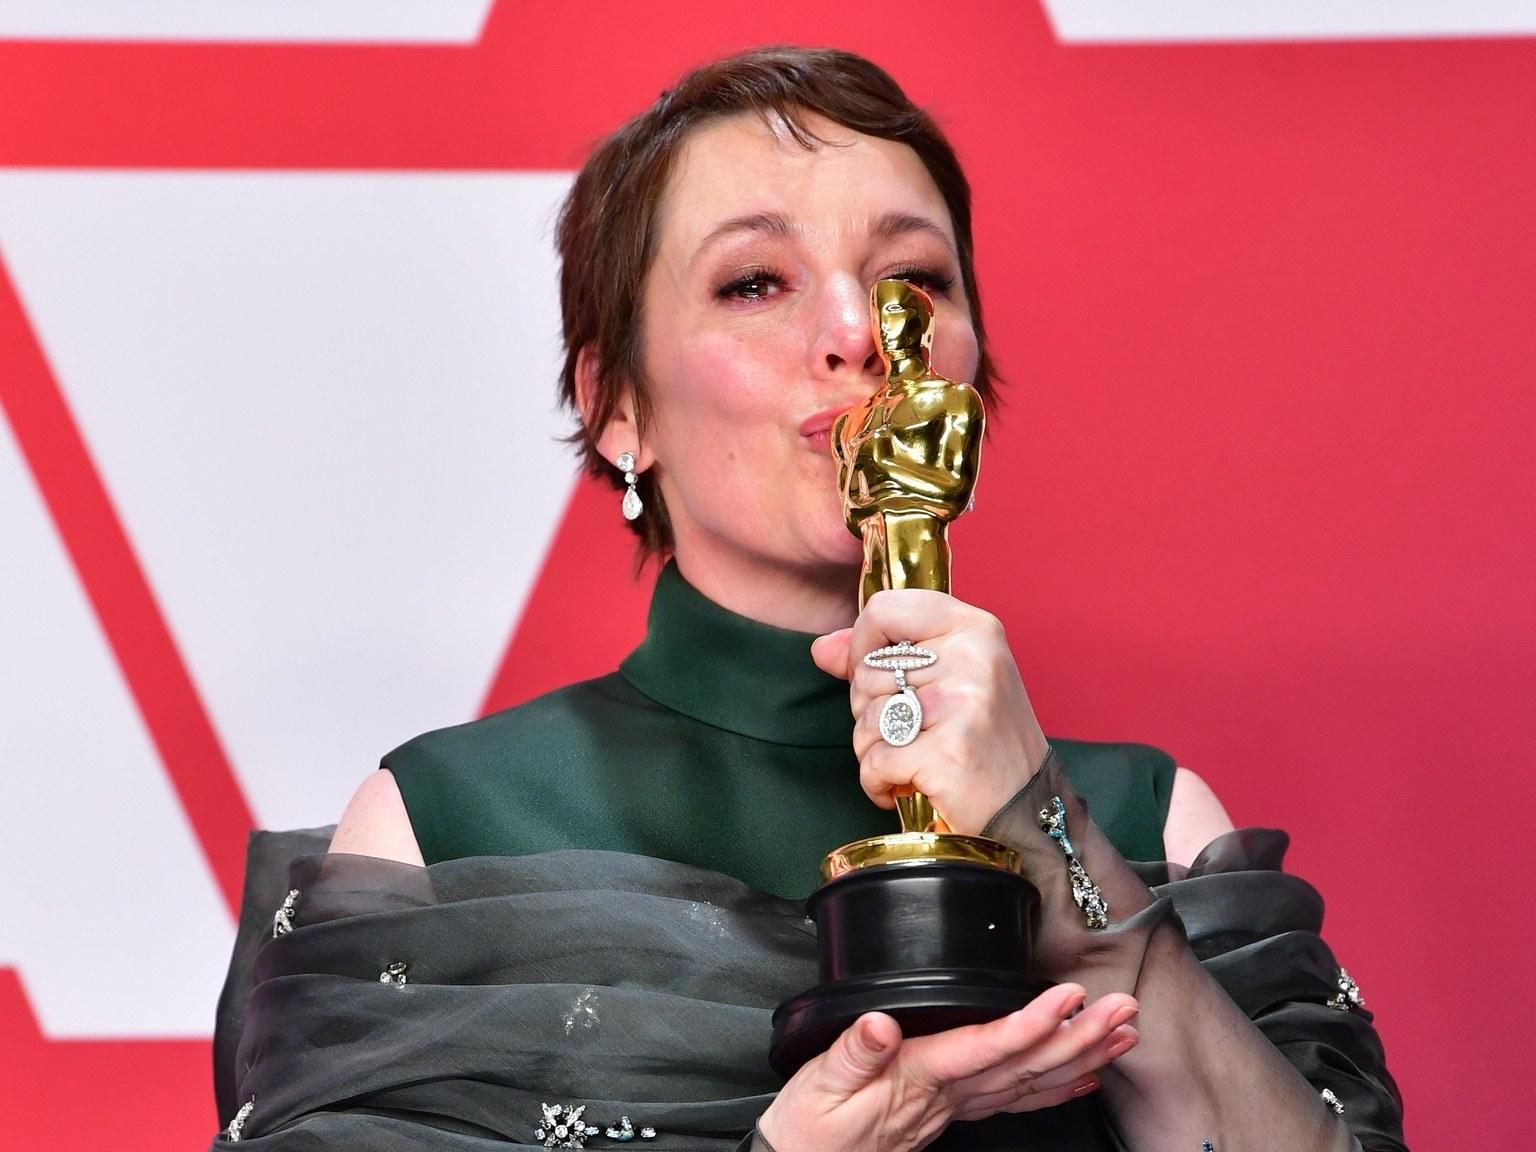 Best Performance by an Actress in a Leading Role - Oscar 2019